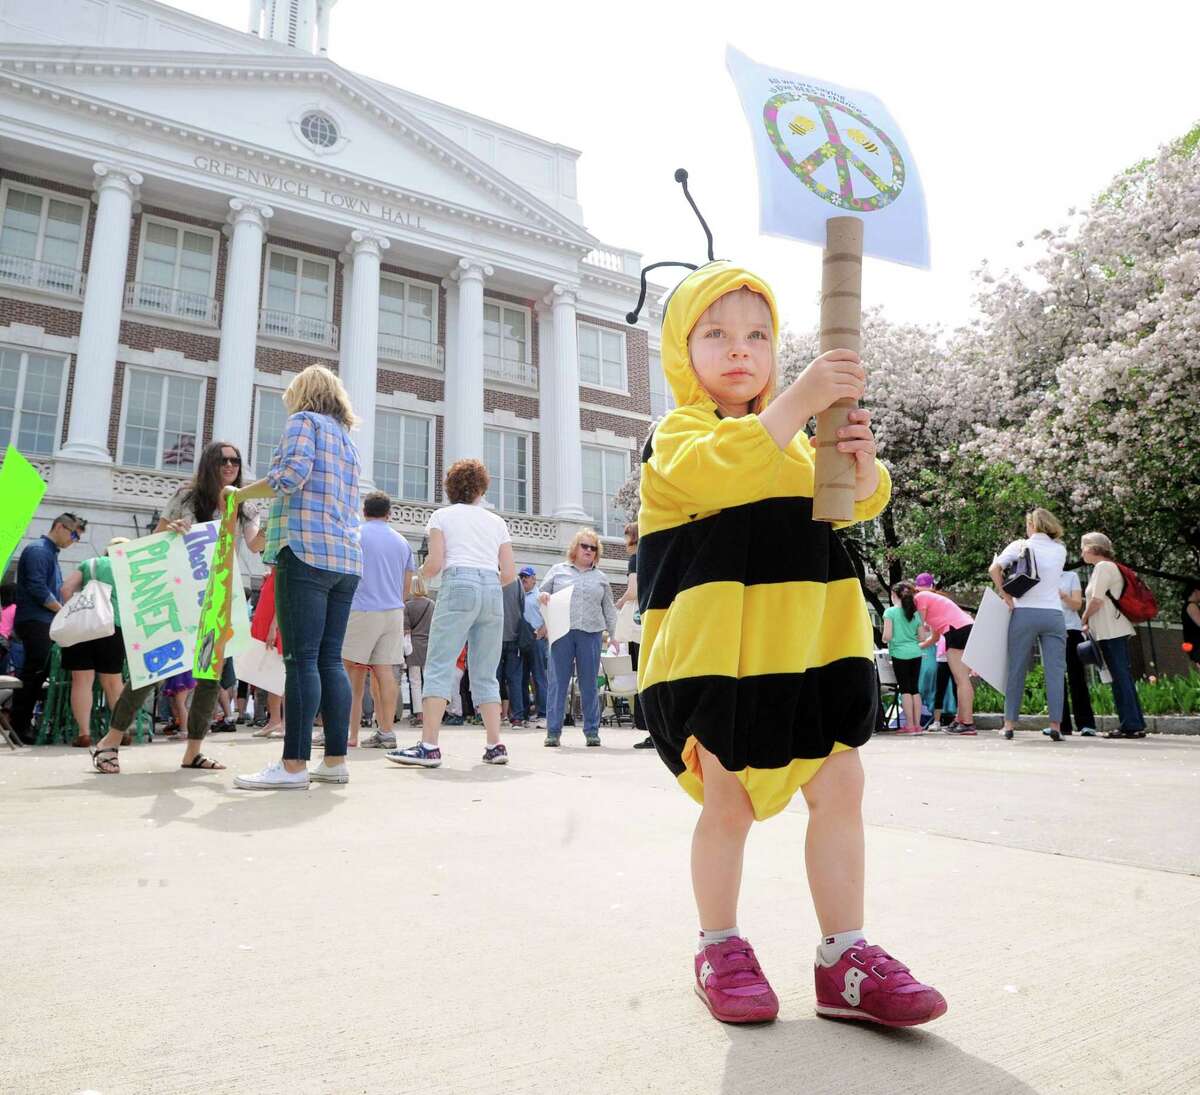 Dressed as a bee, Colleen Cooper, 2, of Cos Cob, holds a sign that says "Give Bees a Chance," during the Children's Environmental March at Greenwich Town Hall, Greenwich, Conn., Saturday morning, April 29, 2017. The gathering of the young environmentalists and their families coincided with the People's Climate March that was taking place in Washington, D.C.